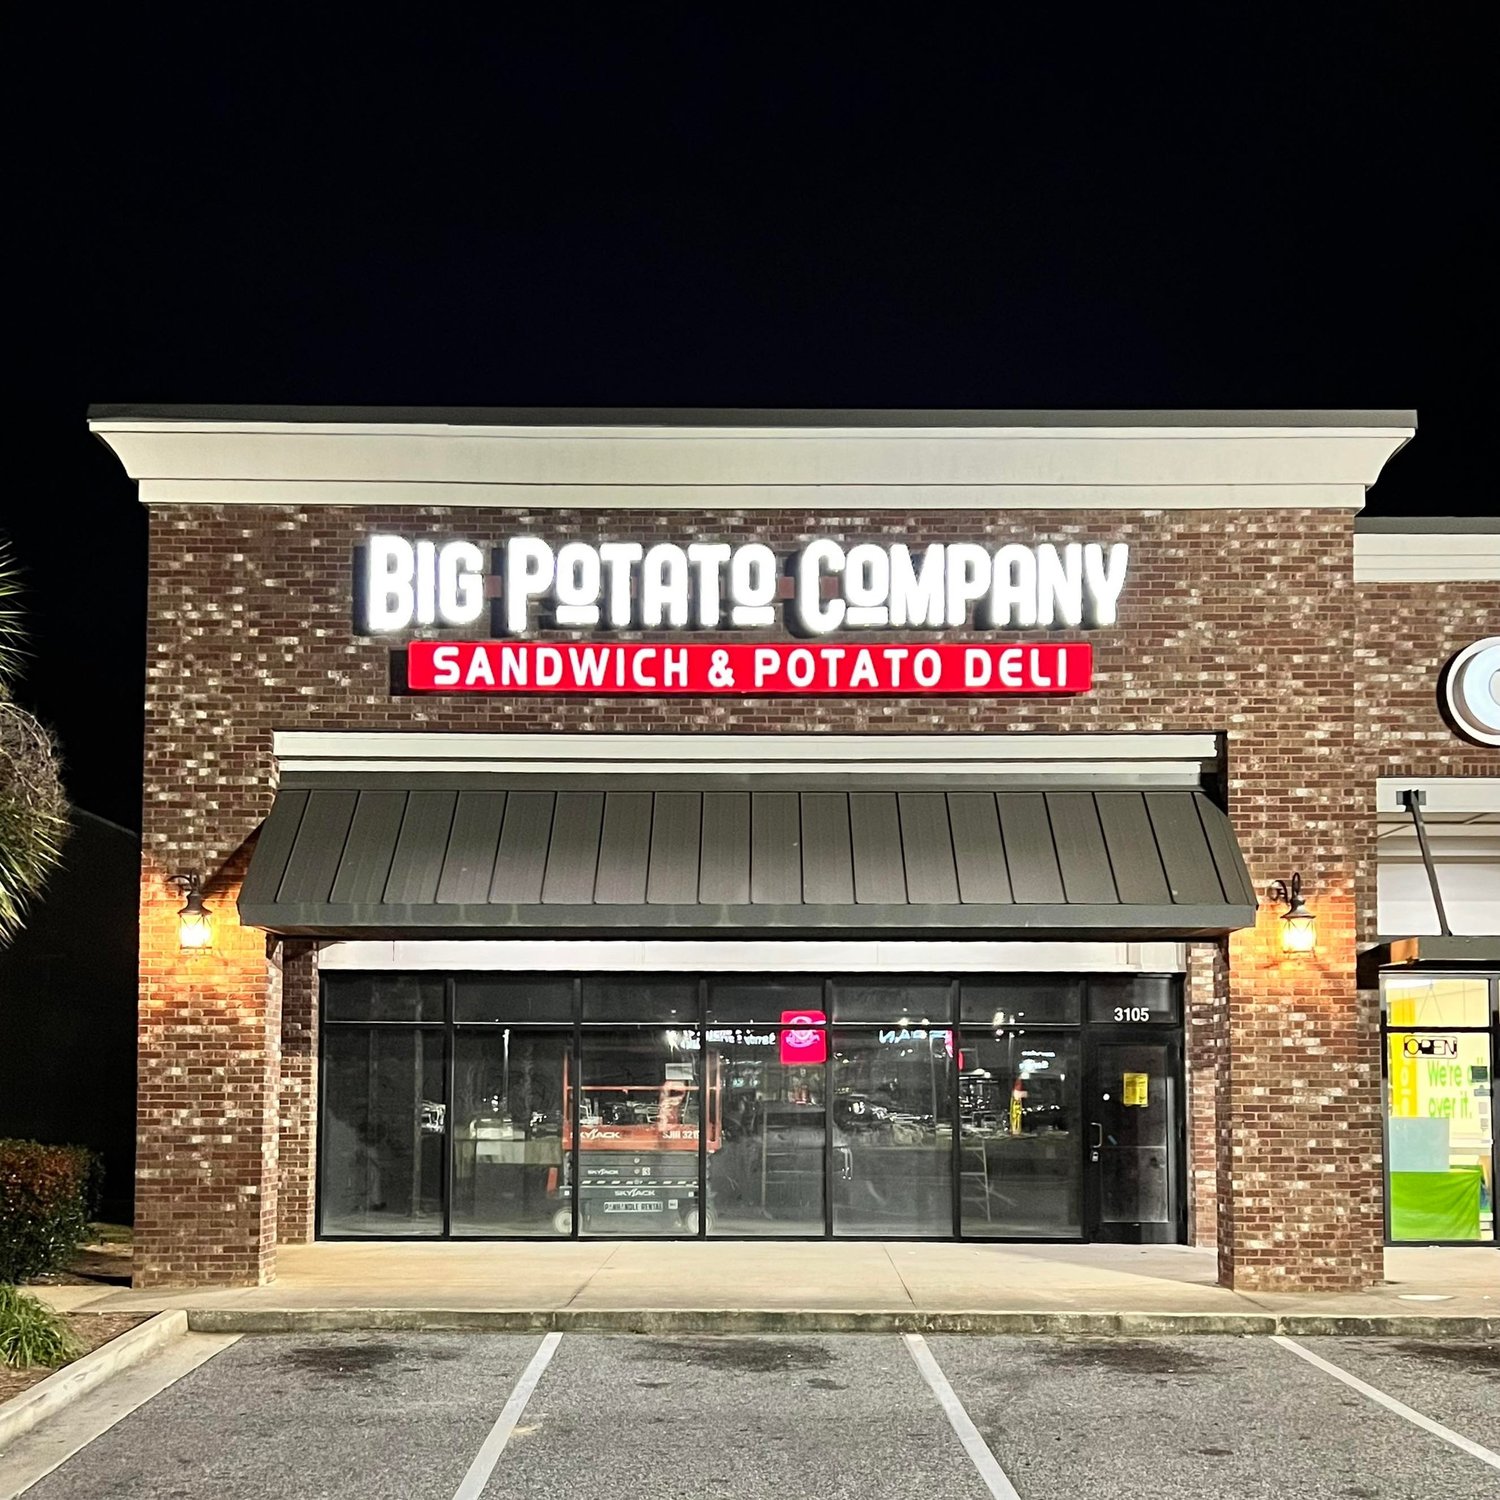 Big Potato Company is located at 3105 S. McKenzie St. The location opened in early May.